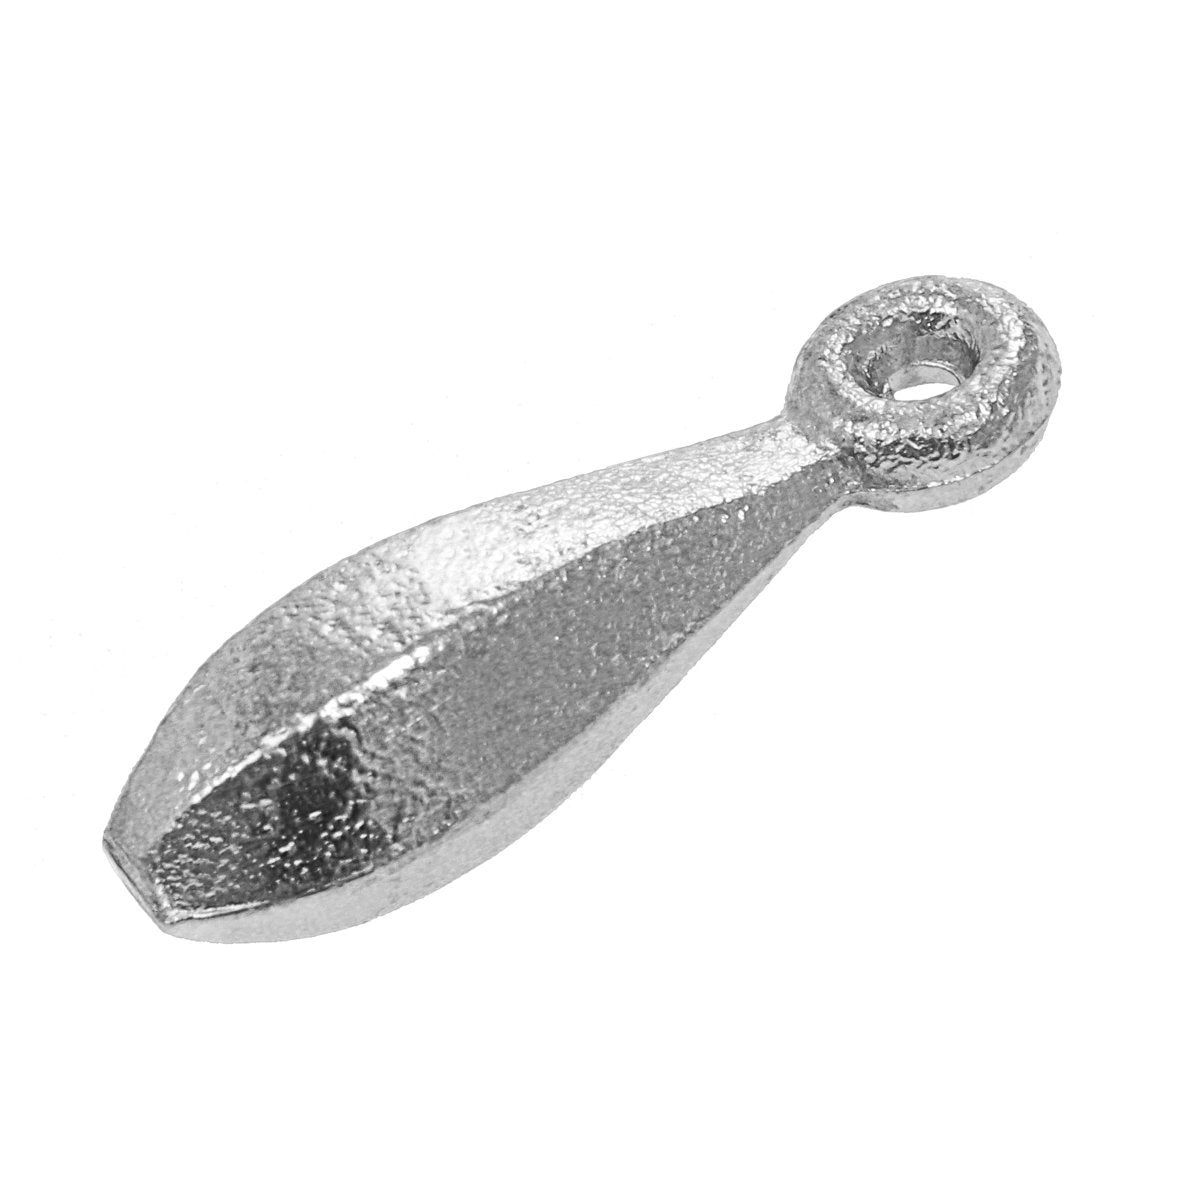 Pin Lead Sinker for Fishing, Freshwater and Saltwater Fishing Weight (